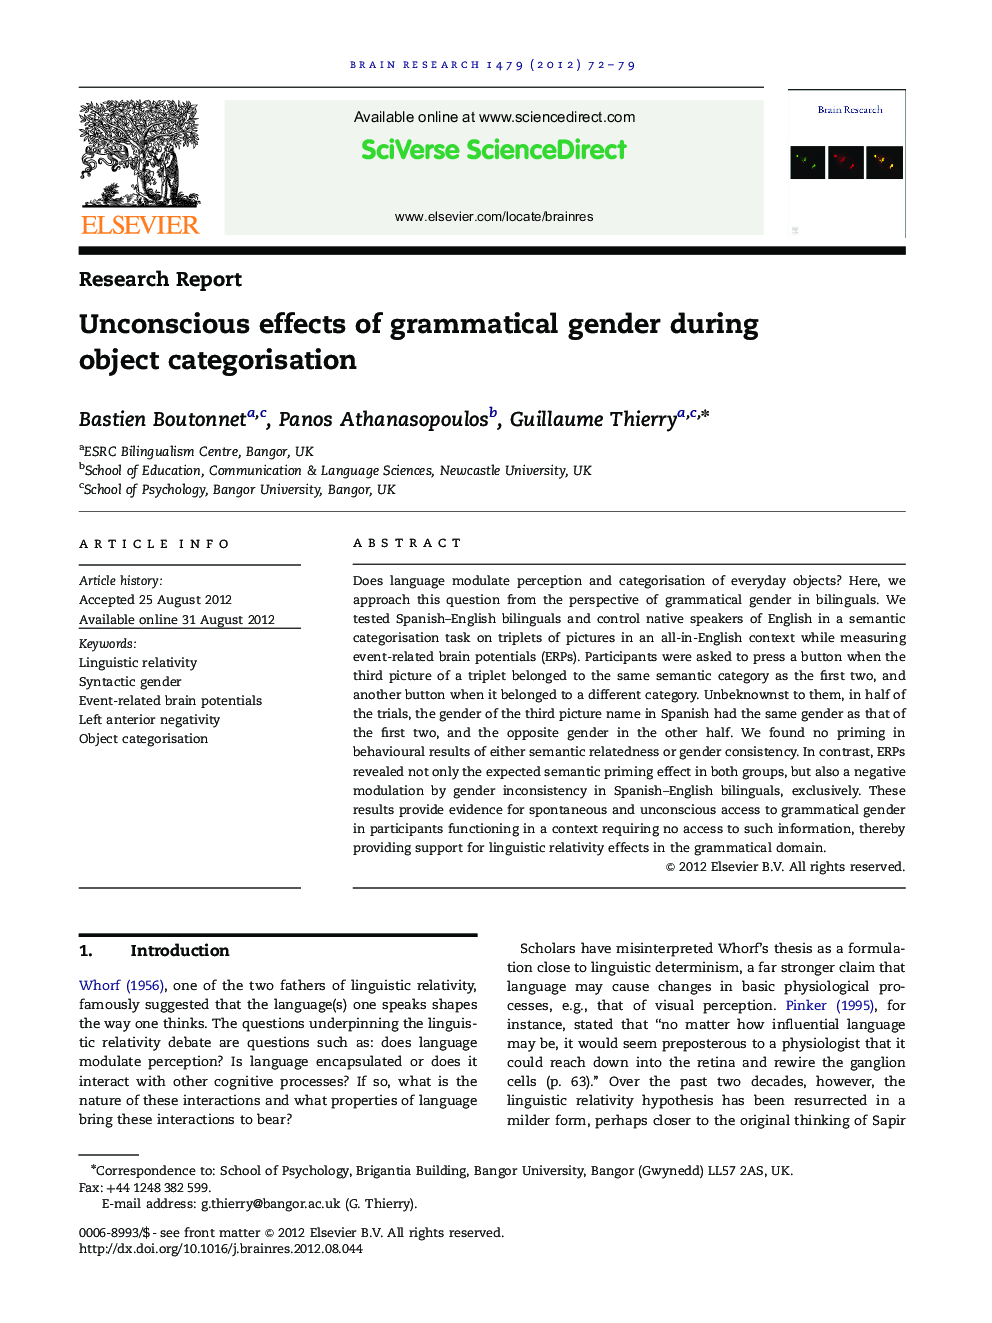 Unconscious effects of grammatical gender during object categorisation